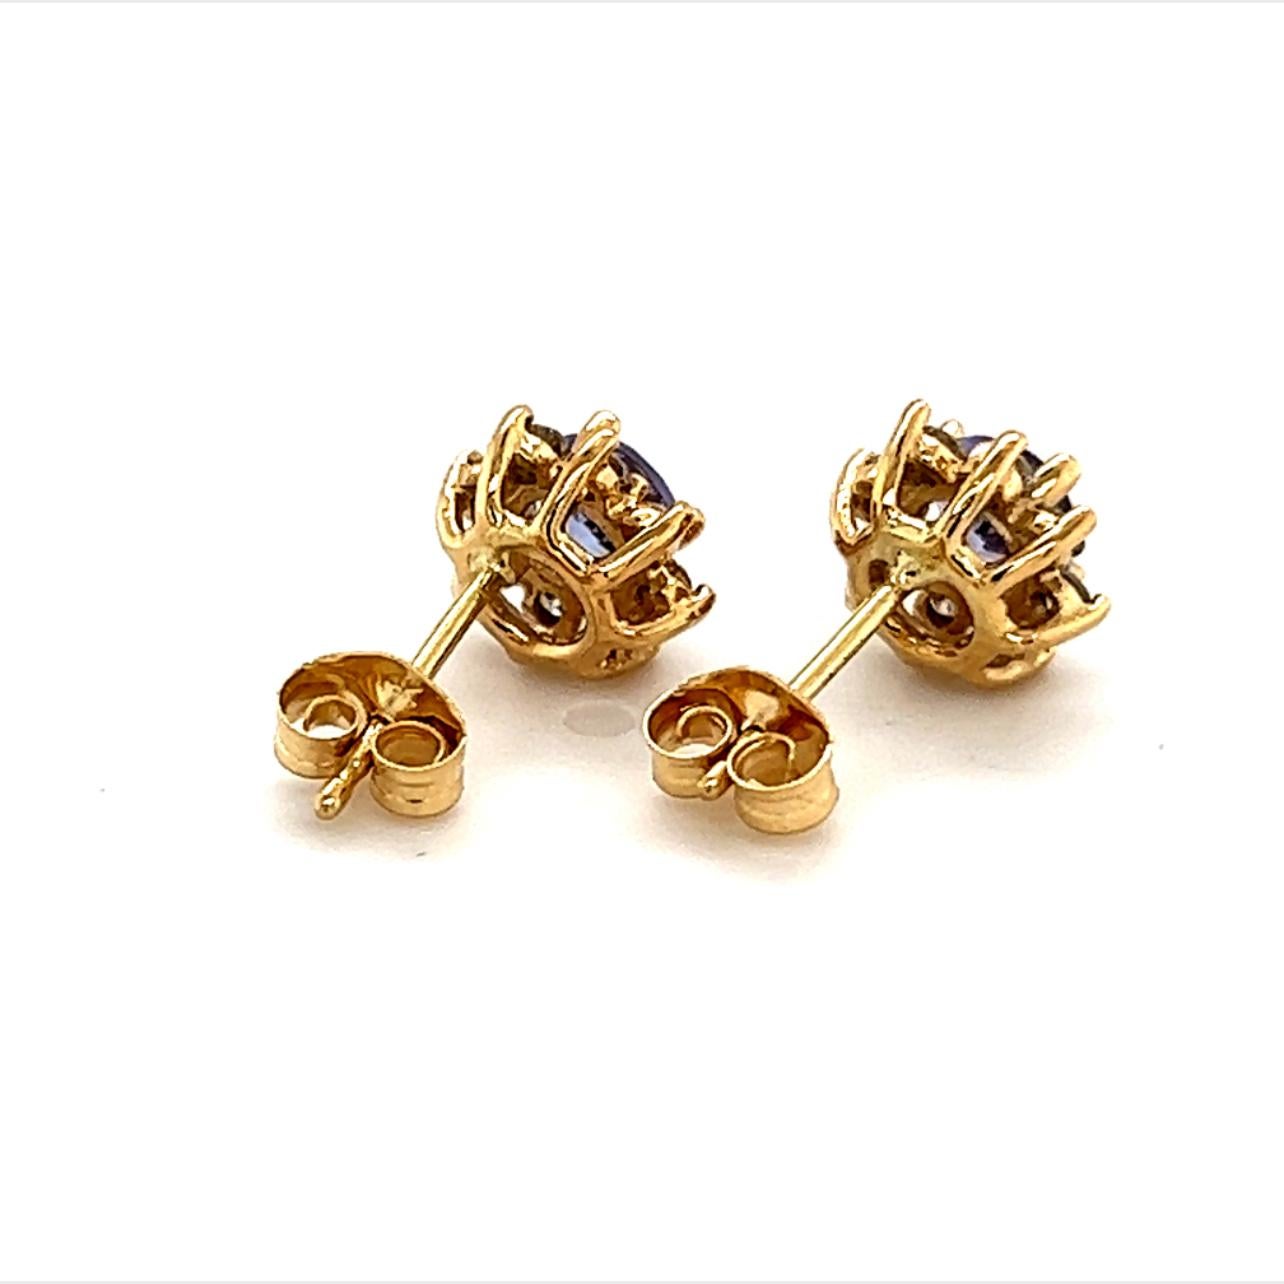 Natural Sapphire Diamond Earrings 14k Gold 1.0 TCW Certified For Sale 4